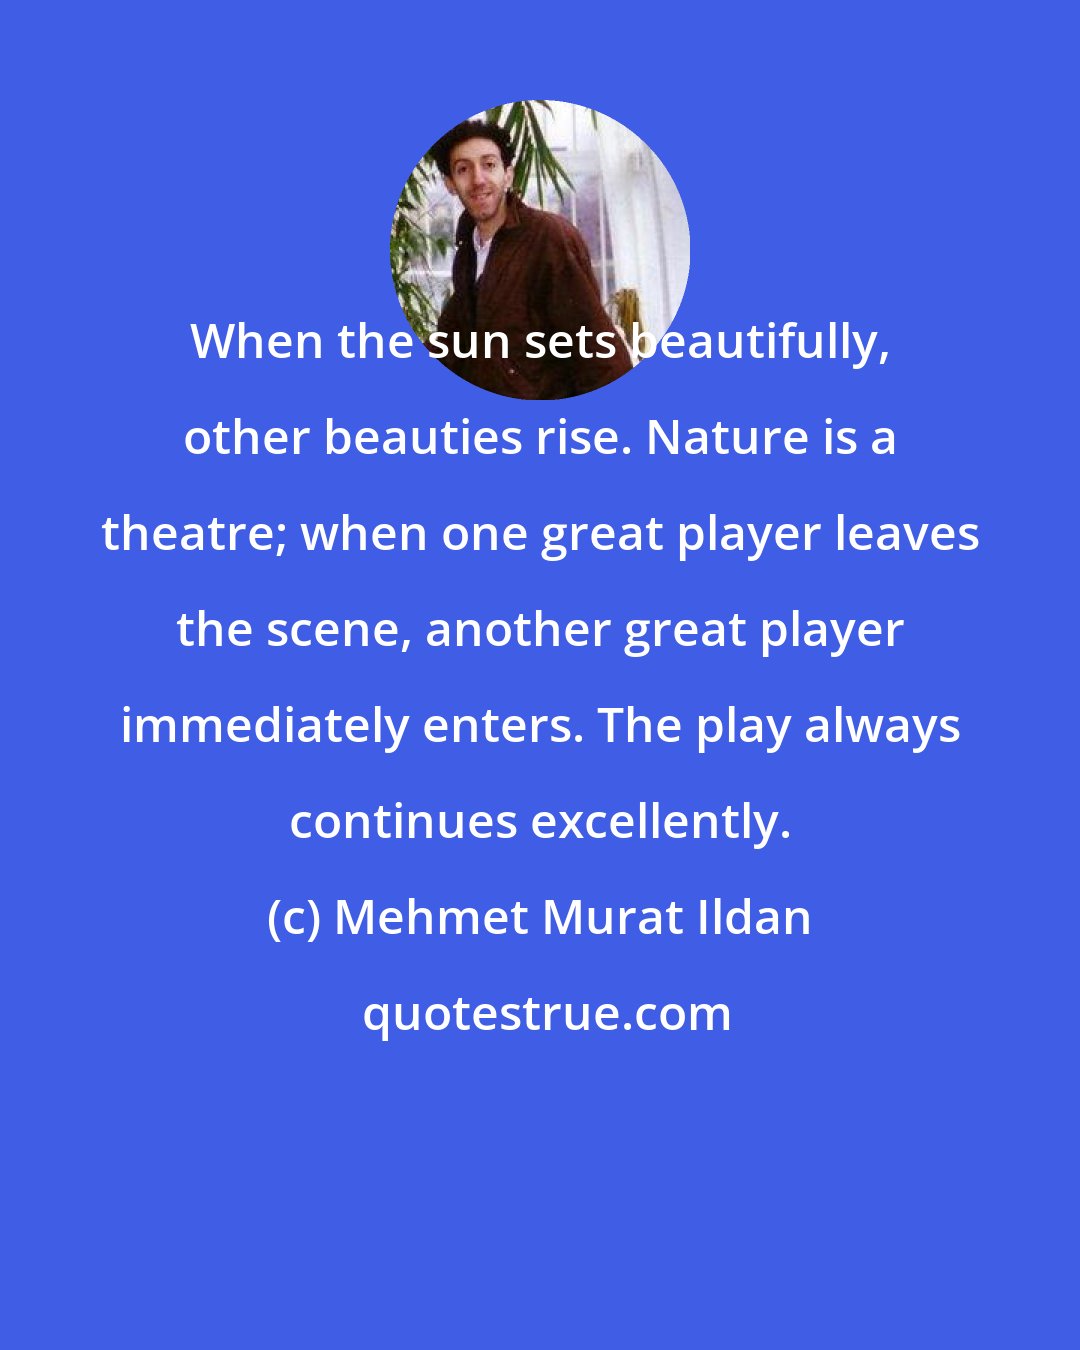 Mehmet Murat Ildan: When the sun sets beautifully, other beauties rise. Nature is a theatre; when one great player leaves the scene, another great player immediately enters. The play always continues excellently.